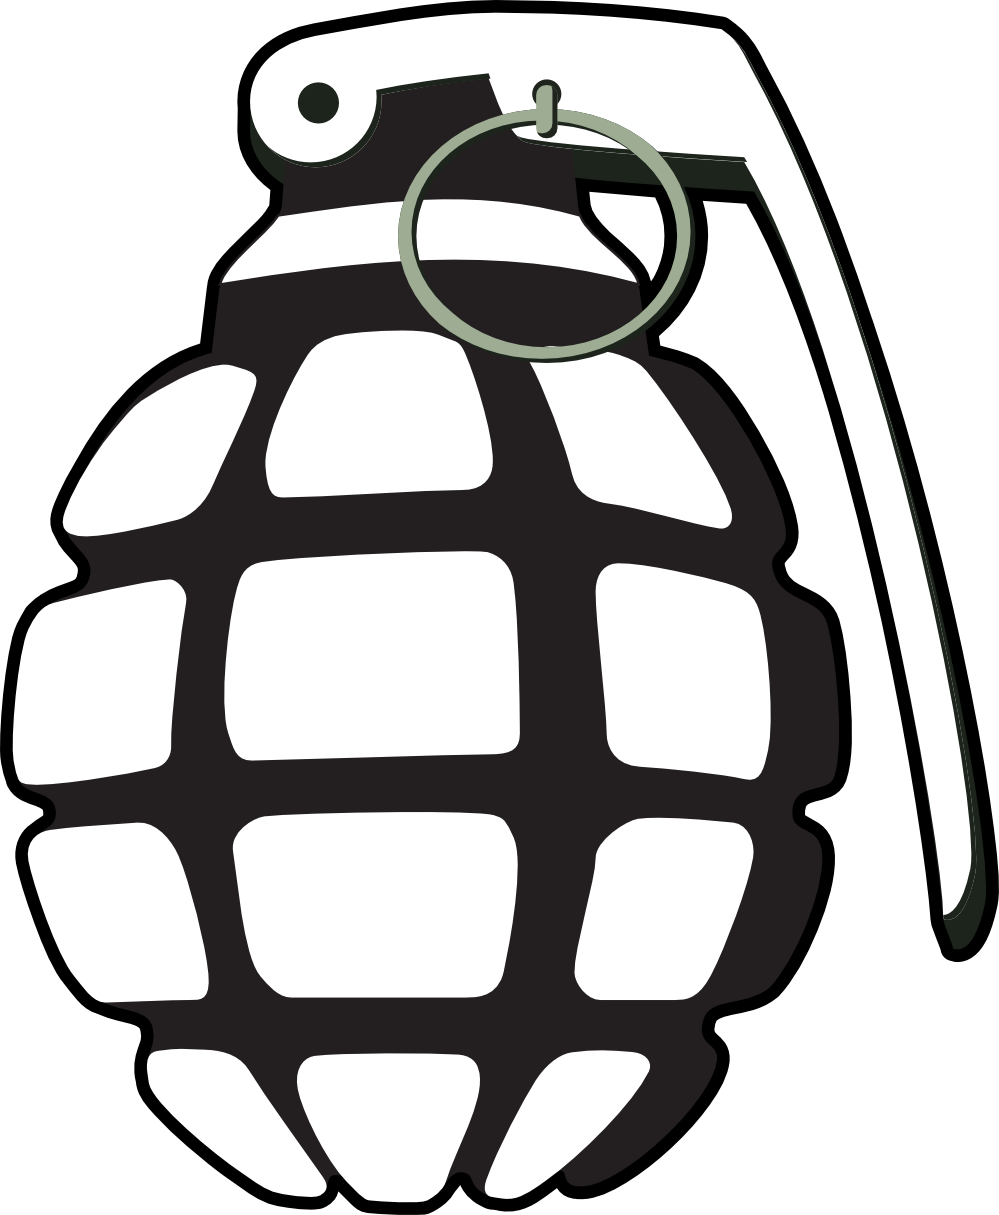 Grenade PNG Images Clipart - Free to use Clip Art Resource